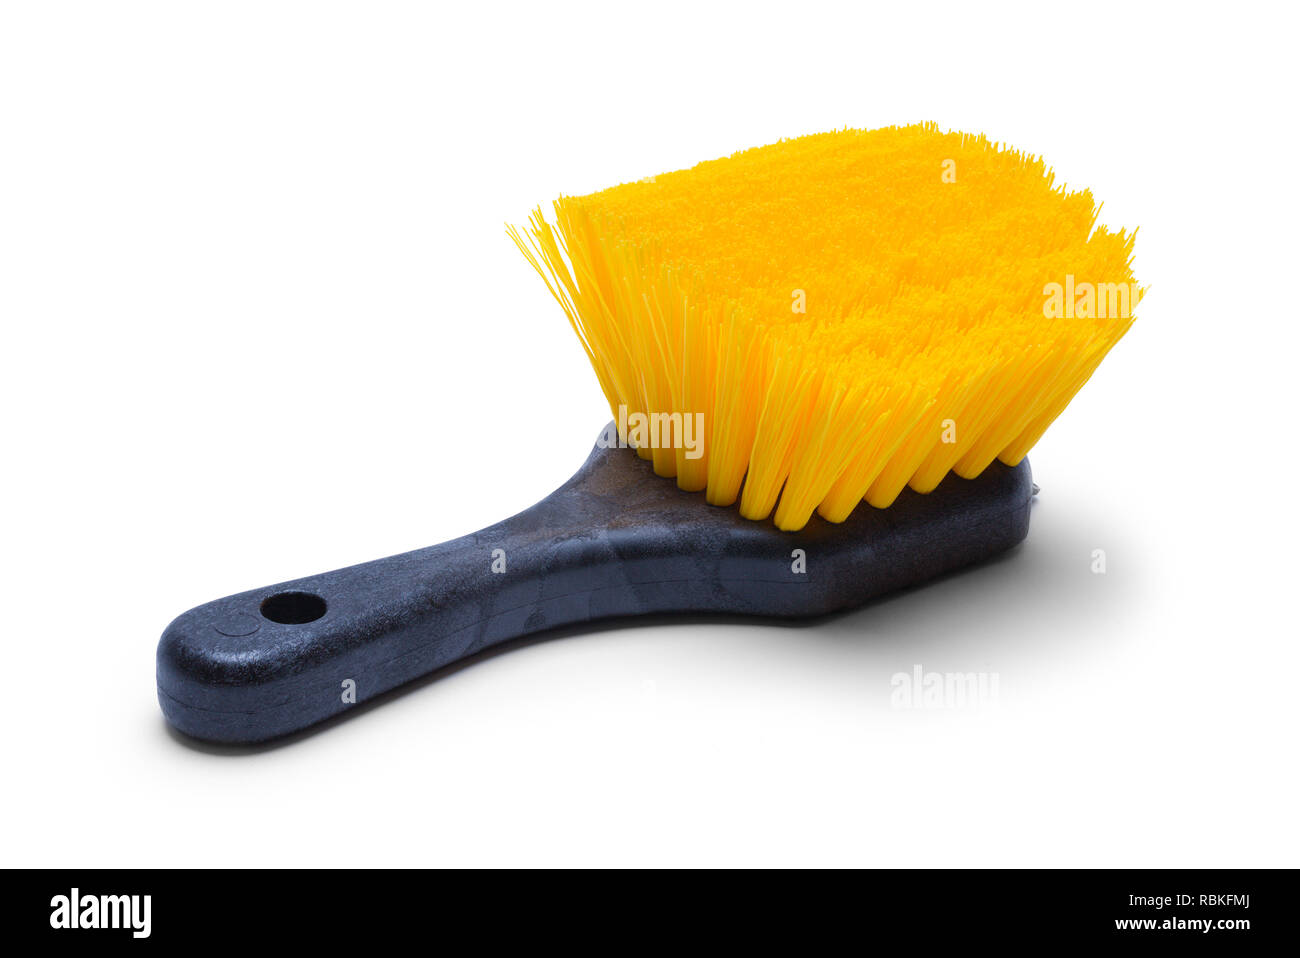 Small Hand Cleaning Brush Isolated on White Background. Stock Photo